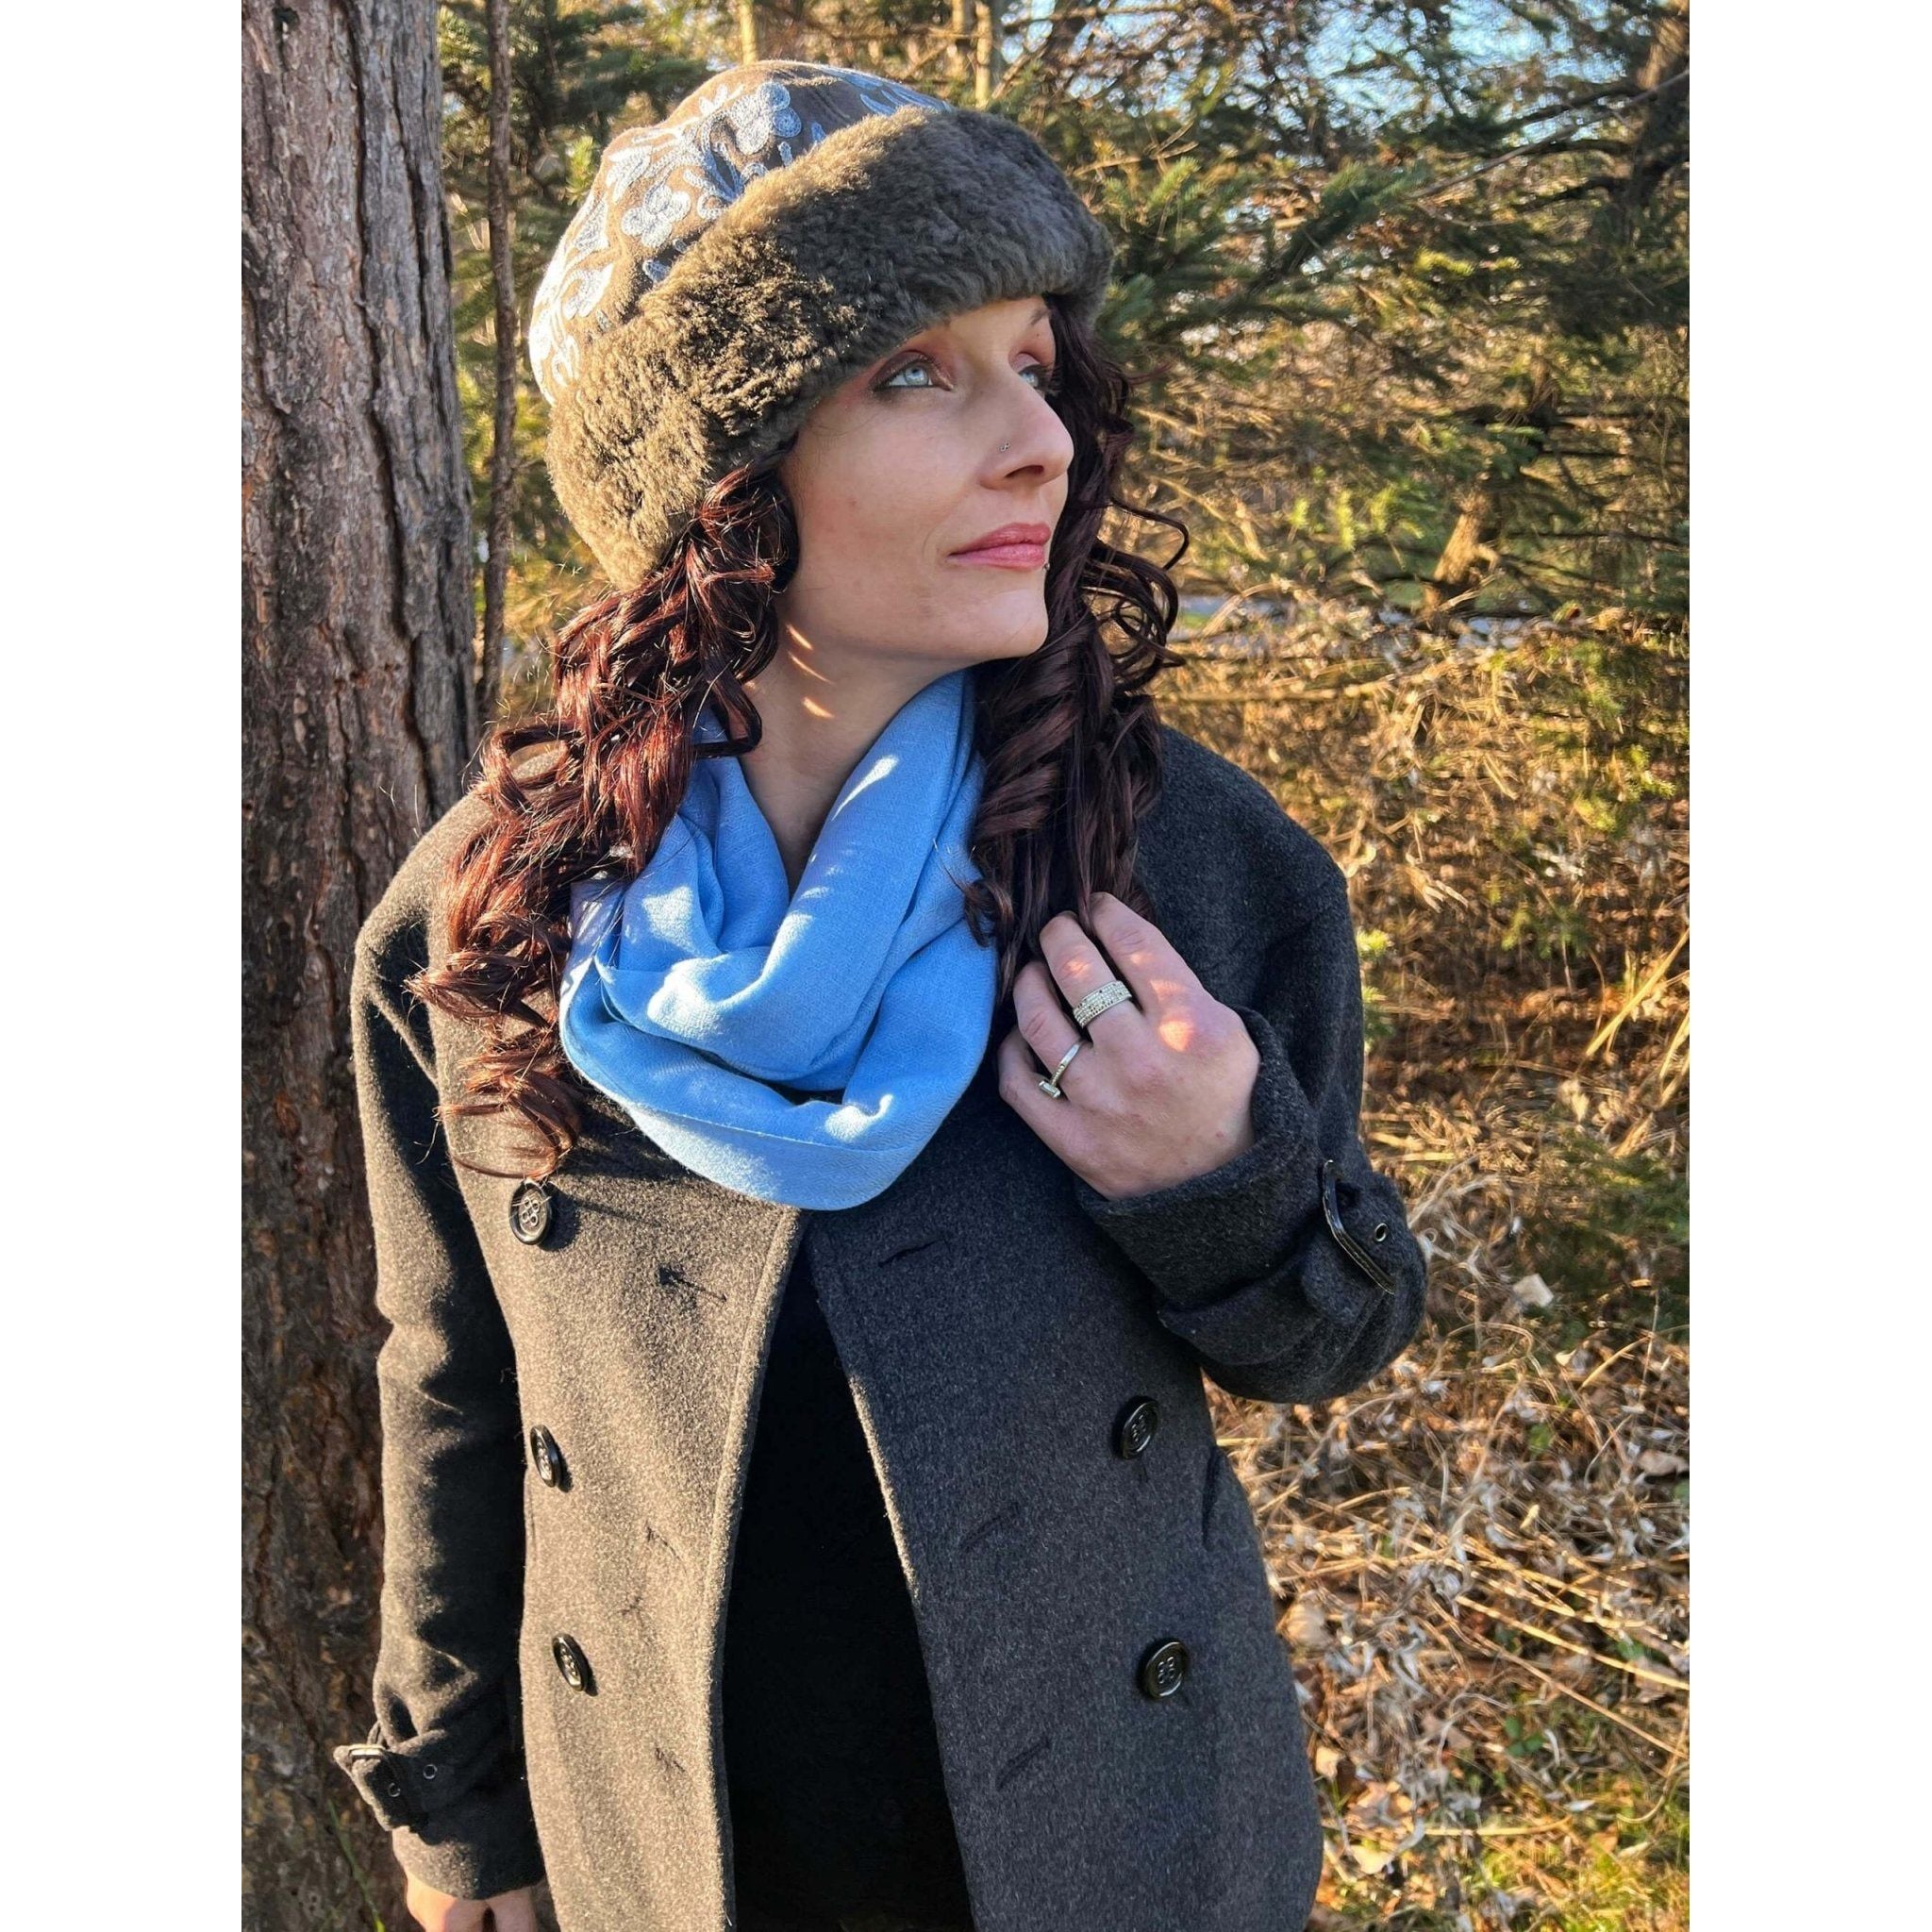 Cozy Elegance: Handmade Suede Grey and Blue Embroidered Winter Hat with Lamb Wool Trim - Unique Fashion for a Stylish Season - KME means the very best